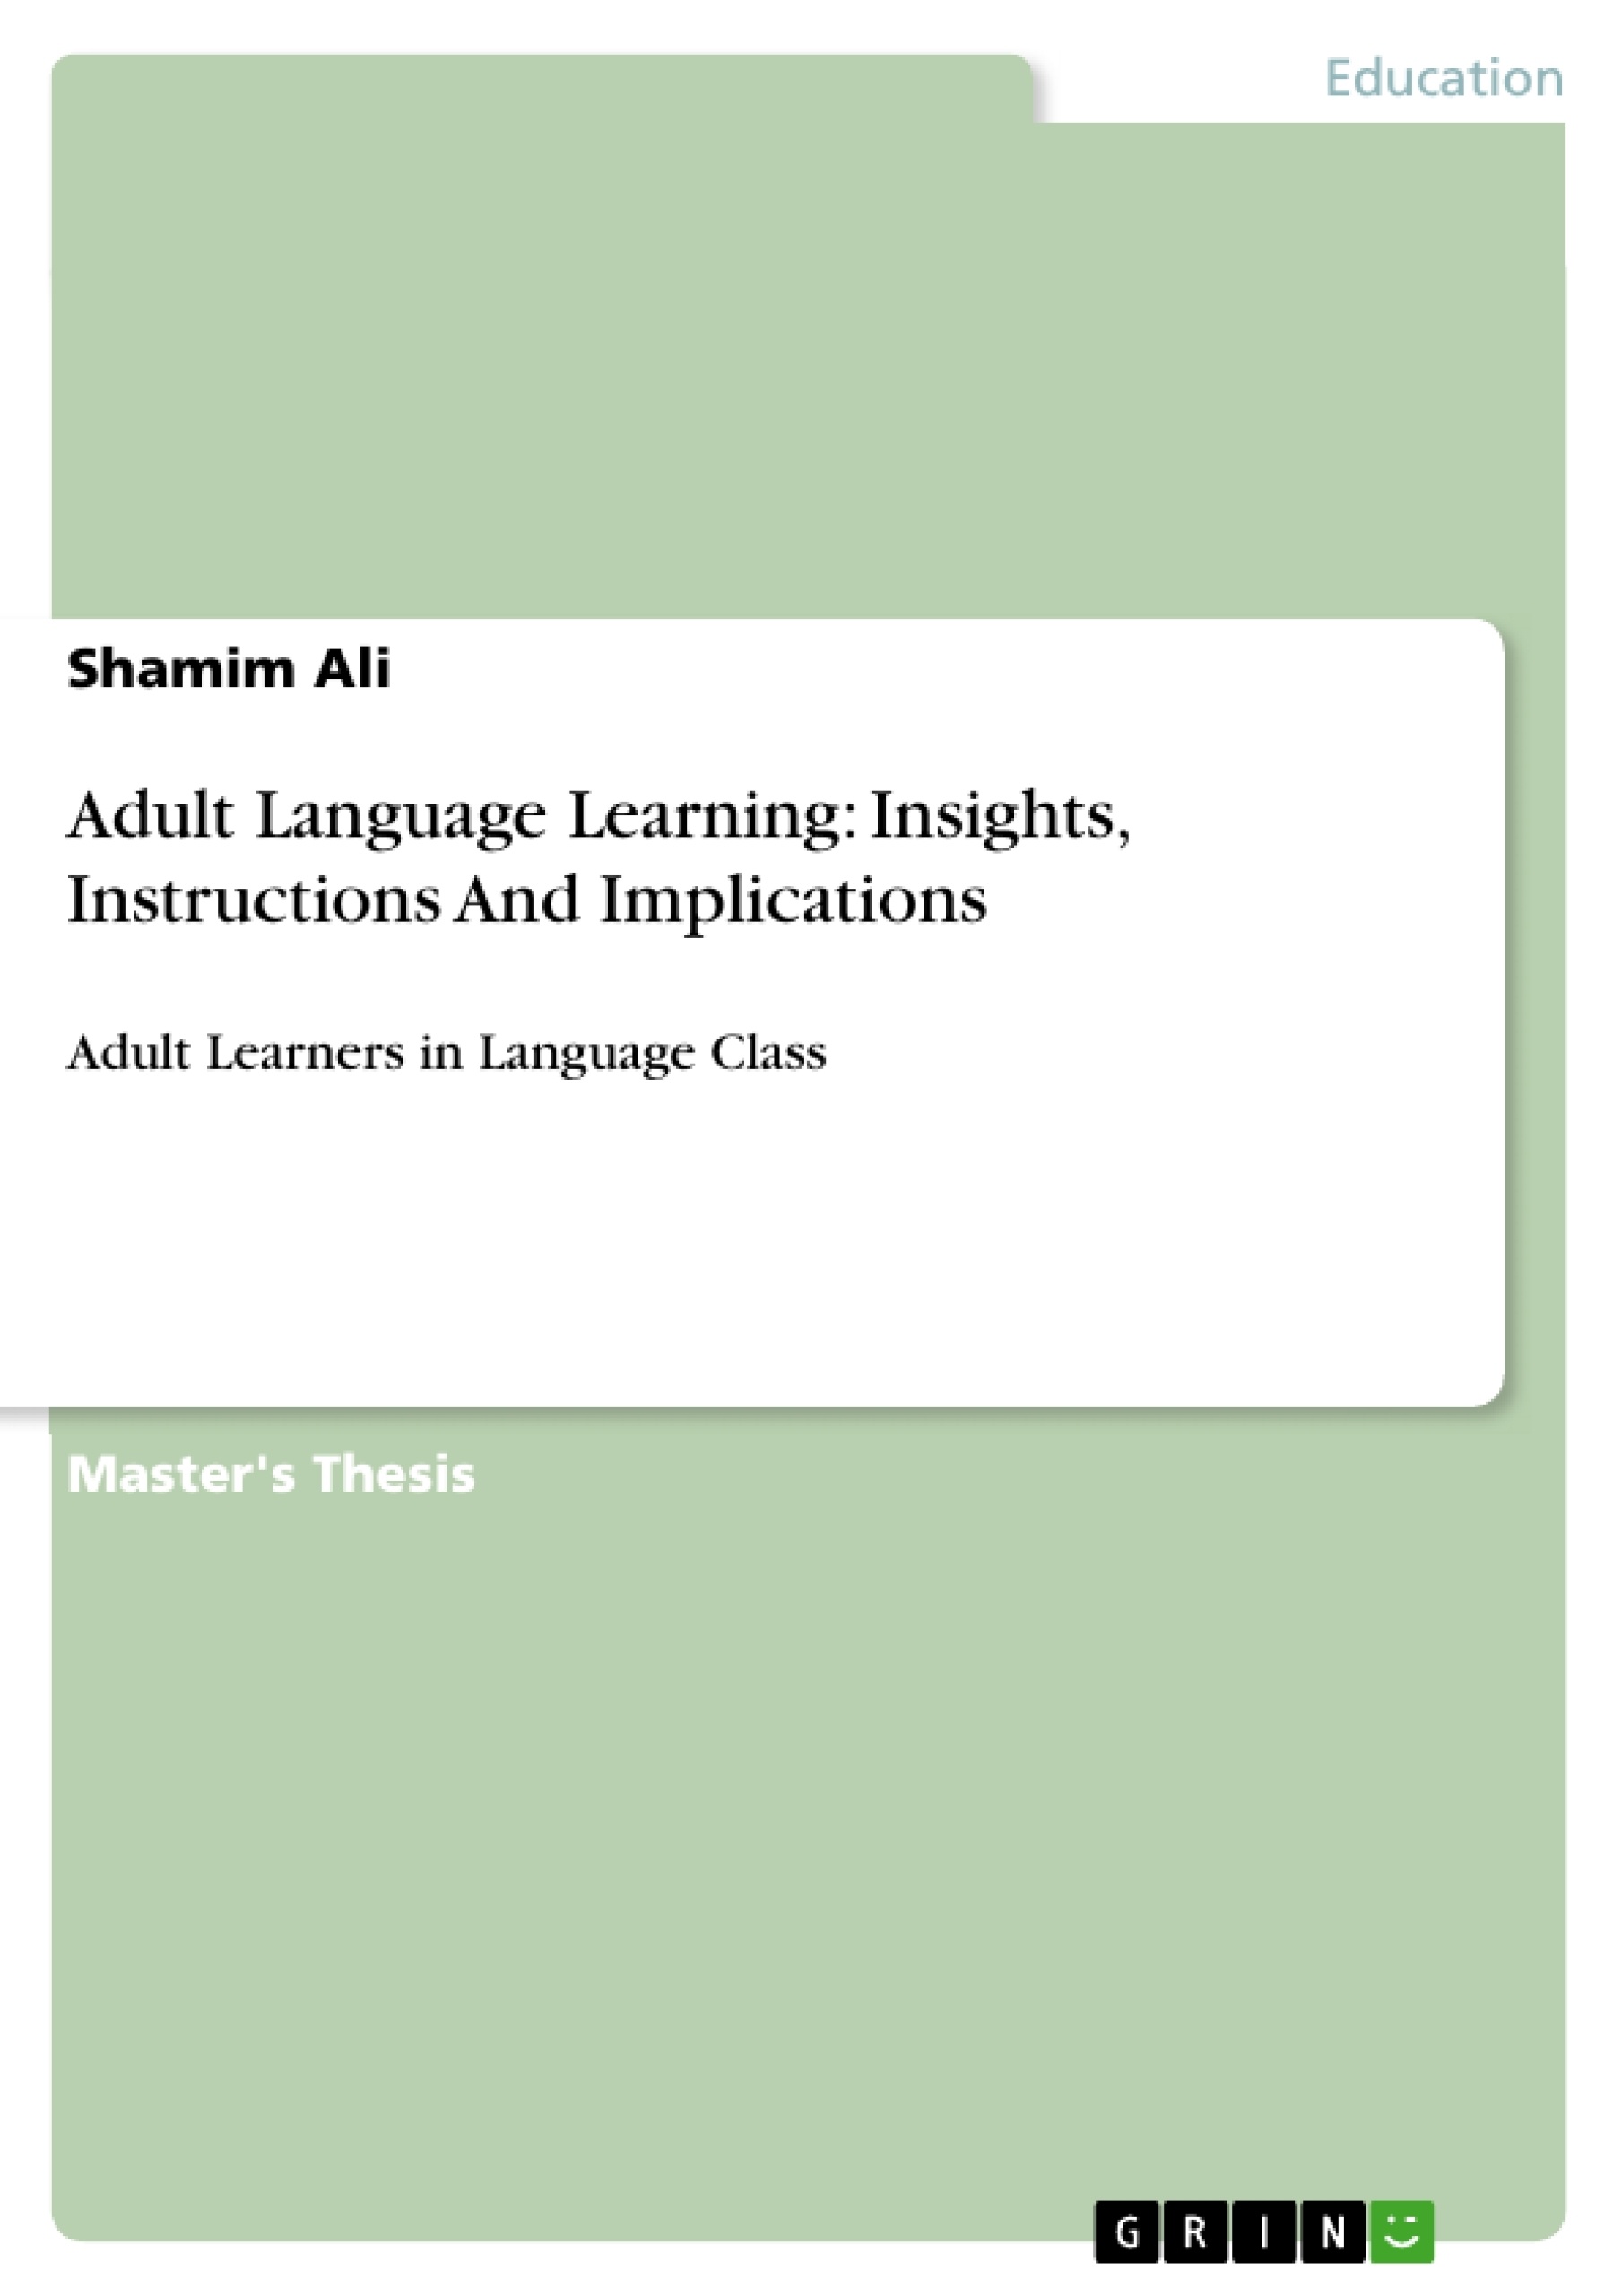 Thesis on language learning